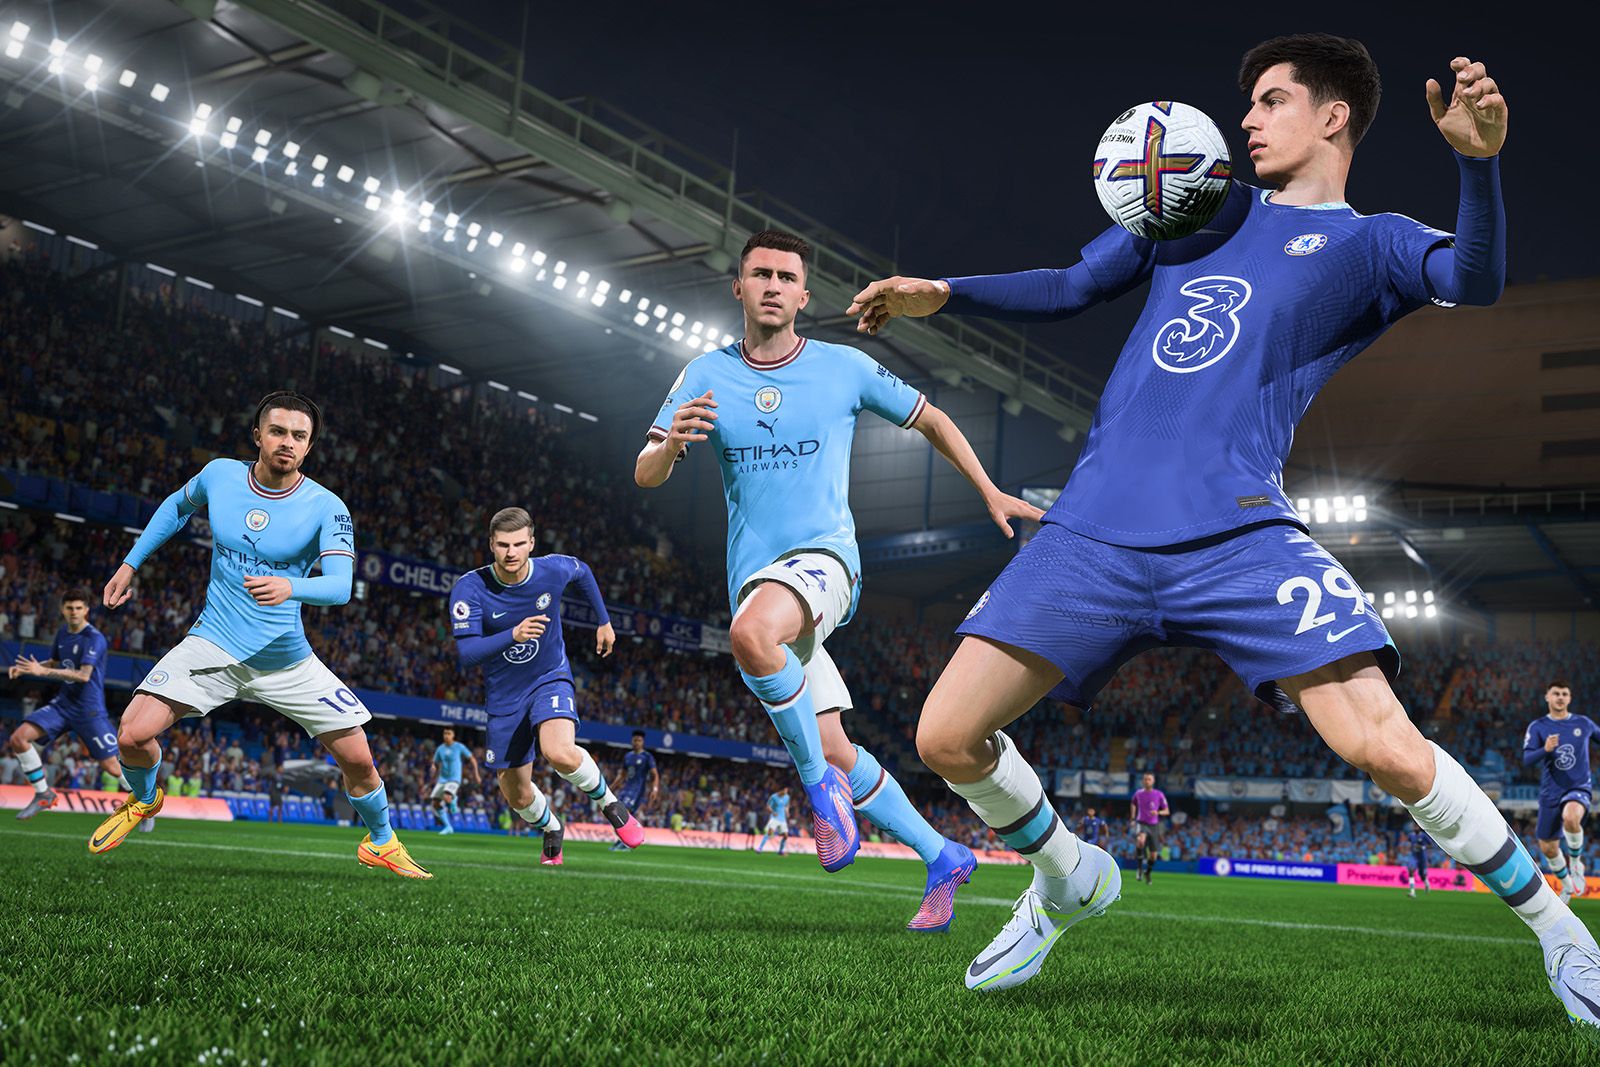 FIFA 23 Lengthy player meta nerfed in latest patch photo 1